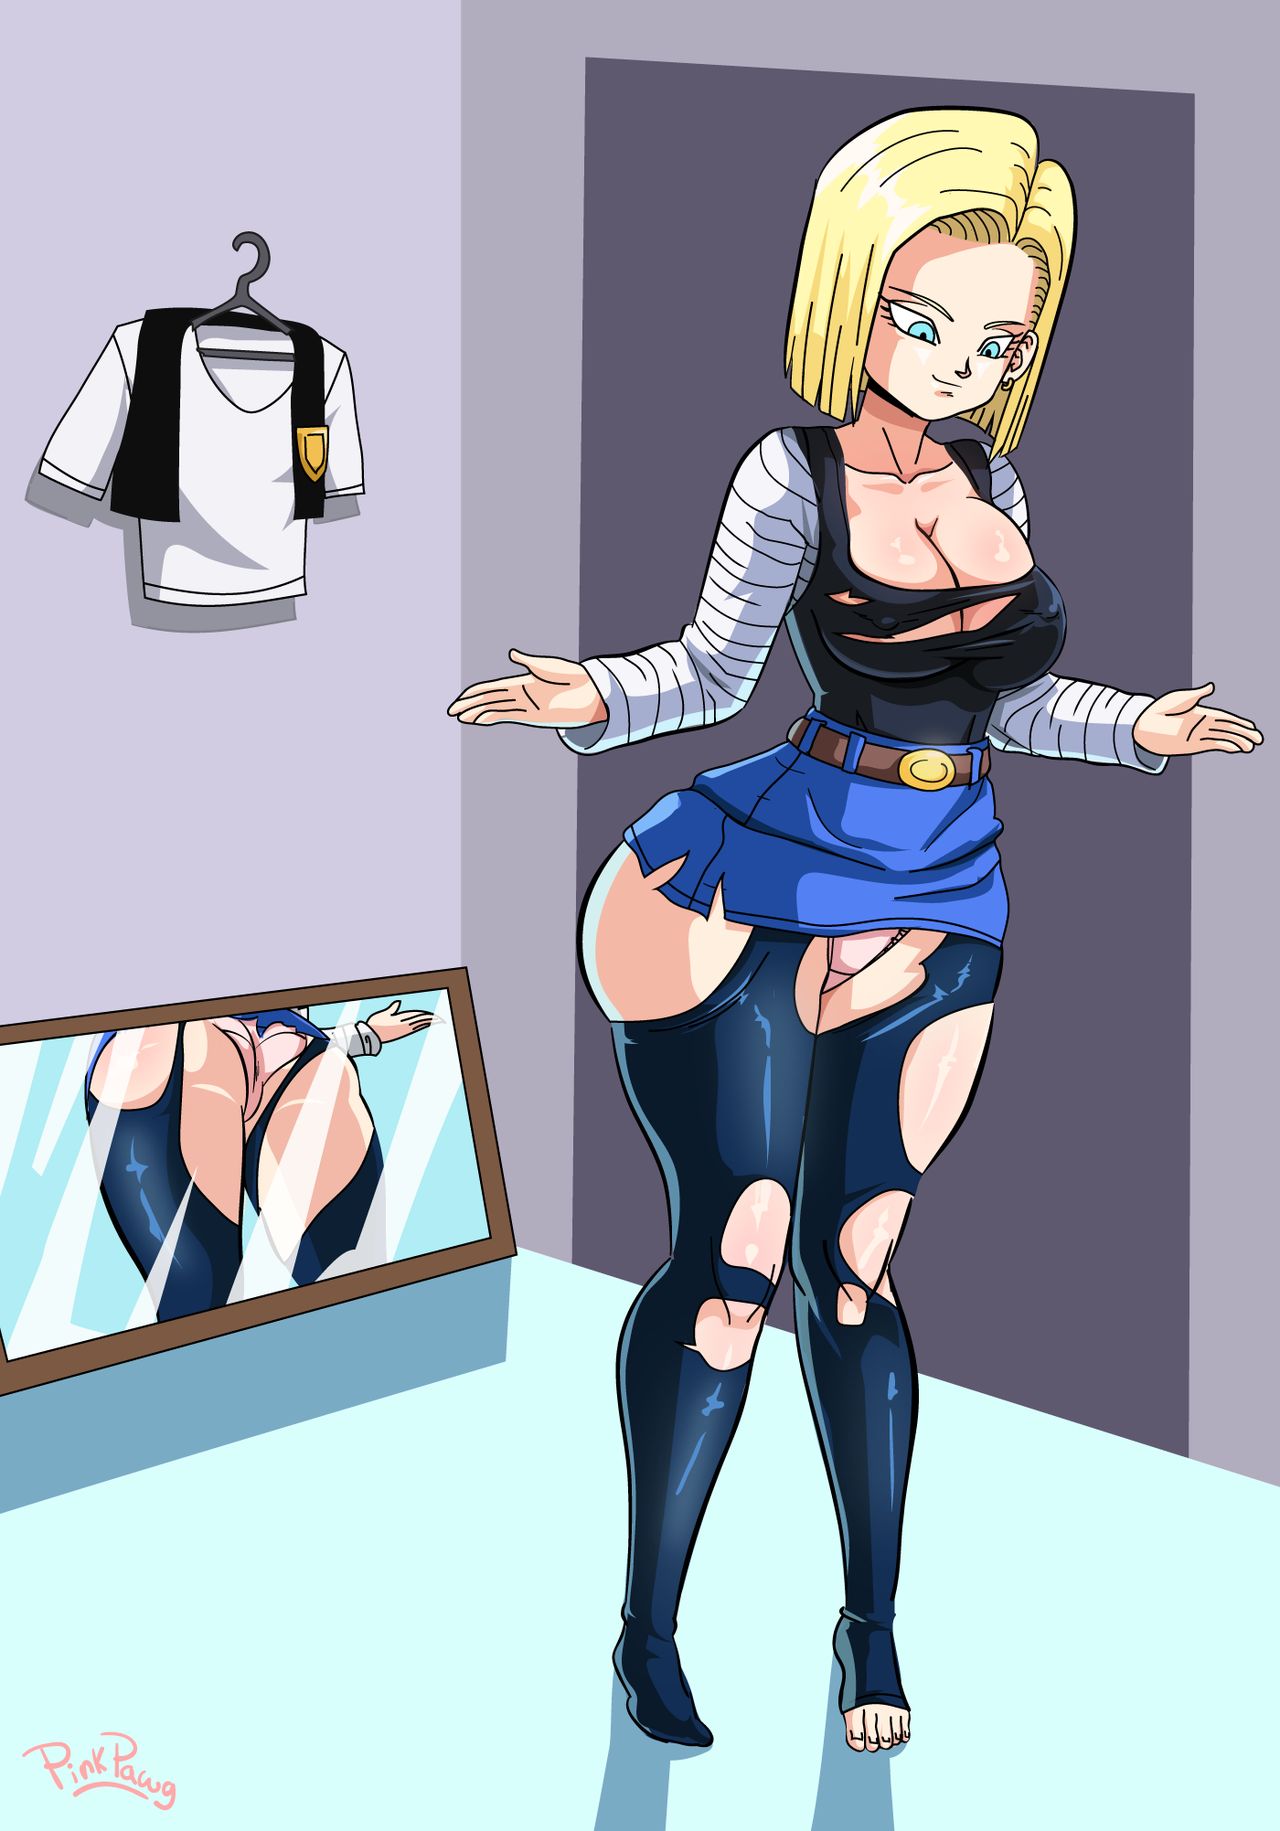 Android 18 meets Krillin (Dragon Ball Z) by Pink Pawg page 2